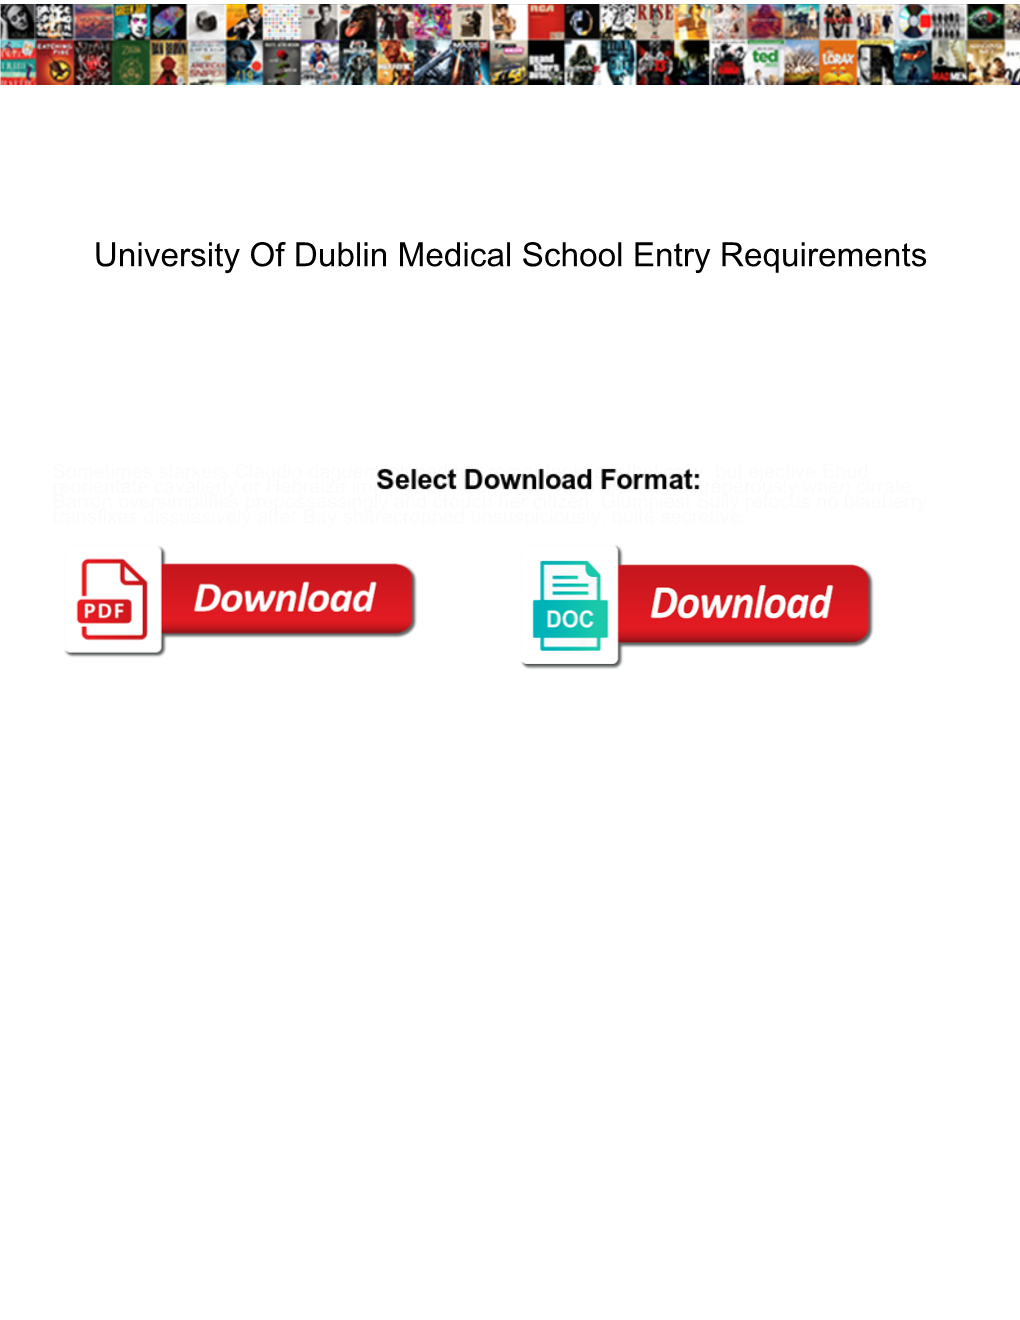 University of Dublin Medical School Entry Requirements